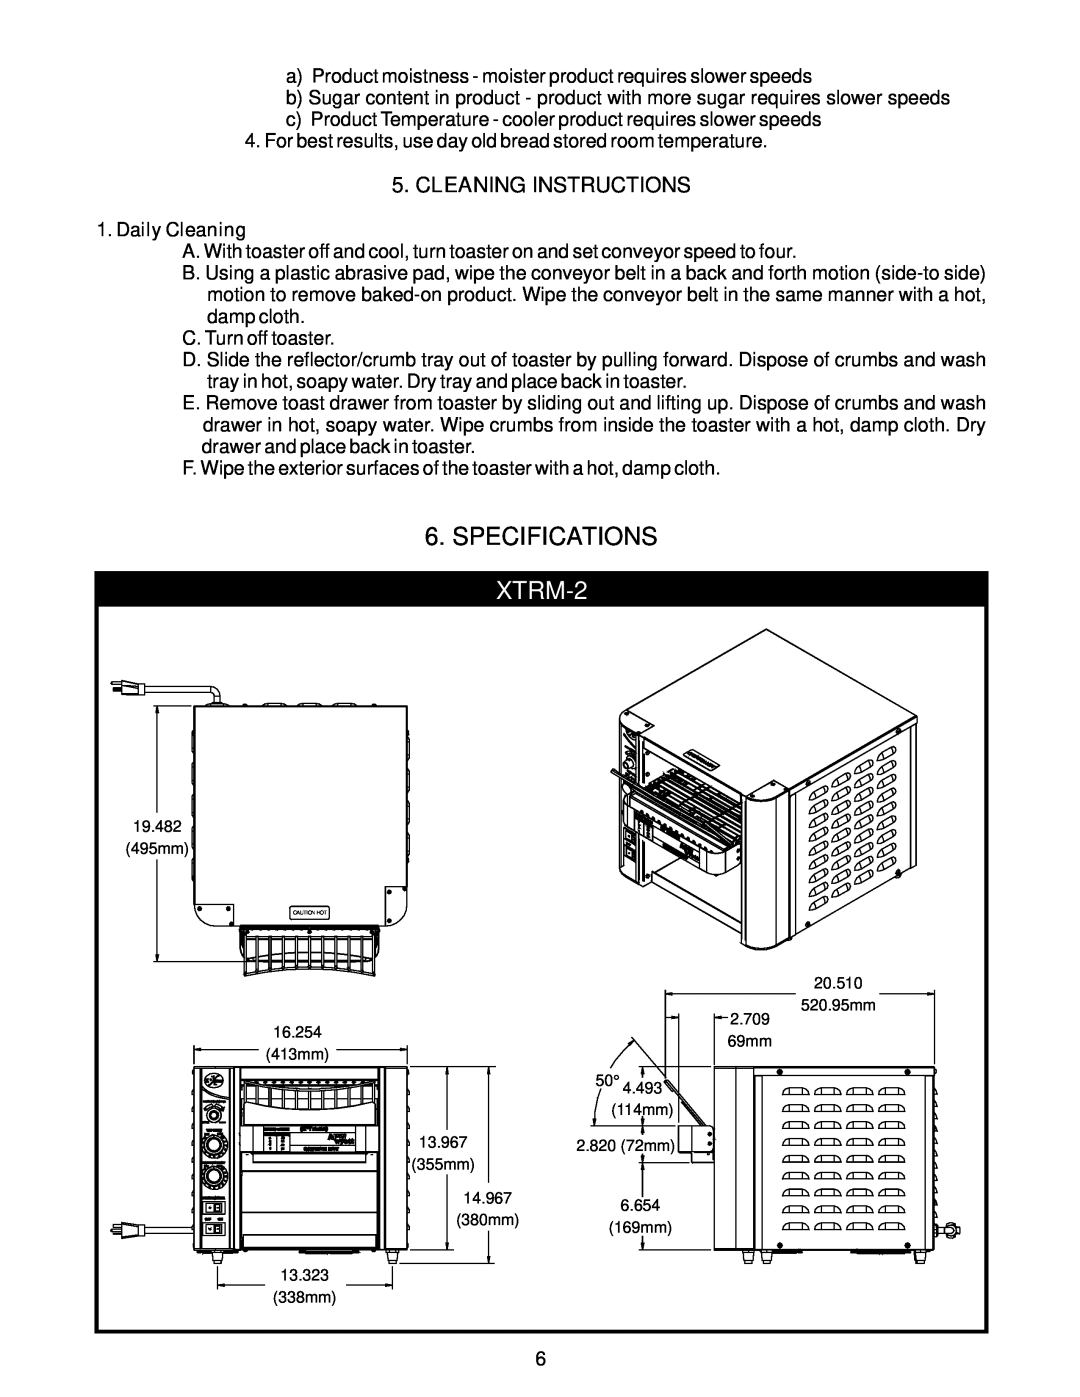 APW Wyott XTRM-2, XTRM-3 operating instructions Specifications, Cleaning Instructions 